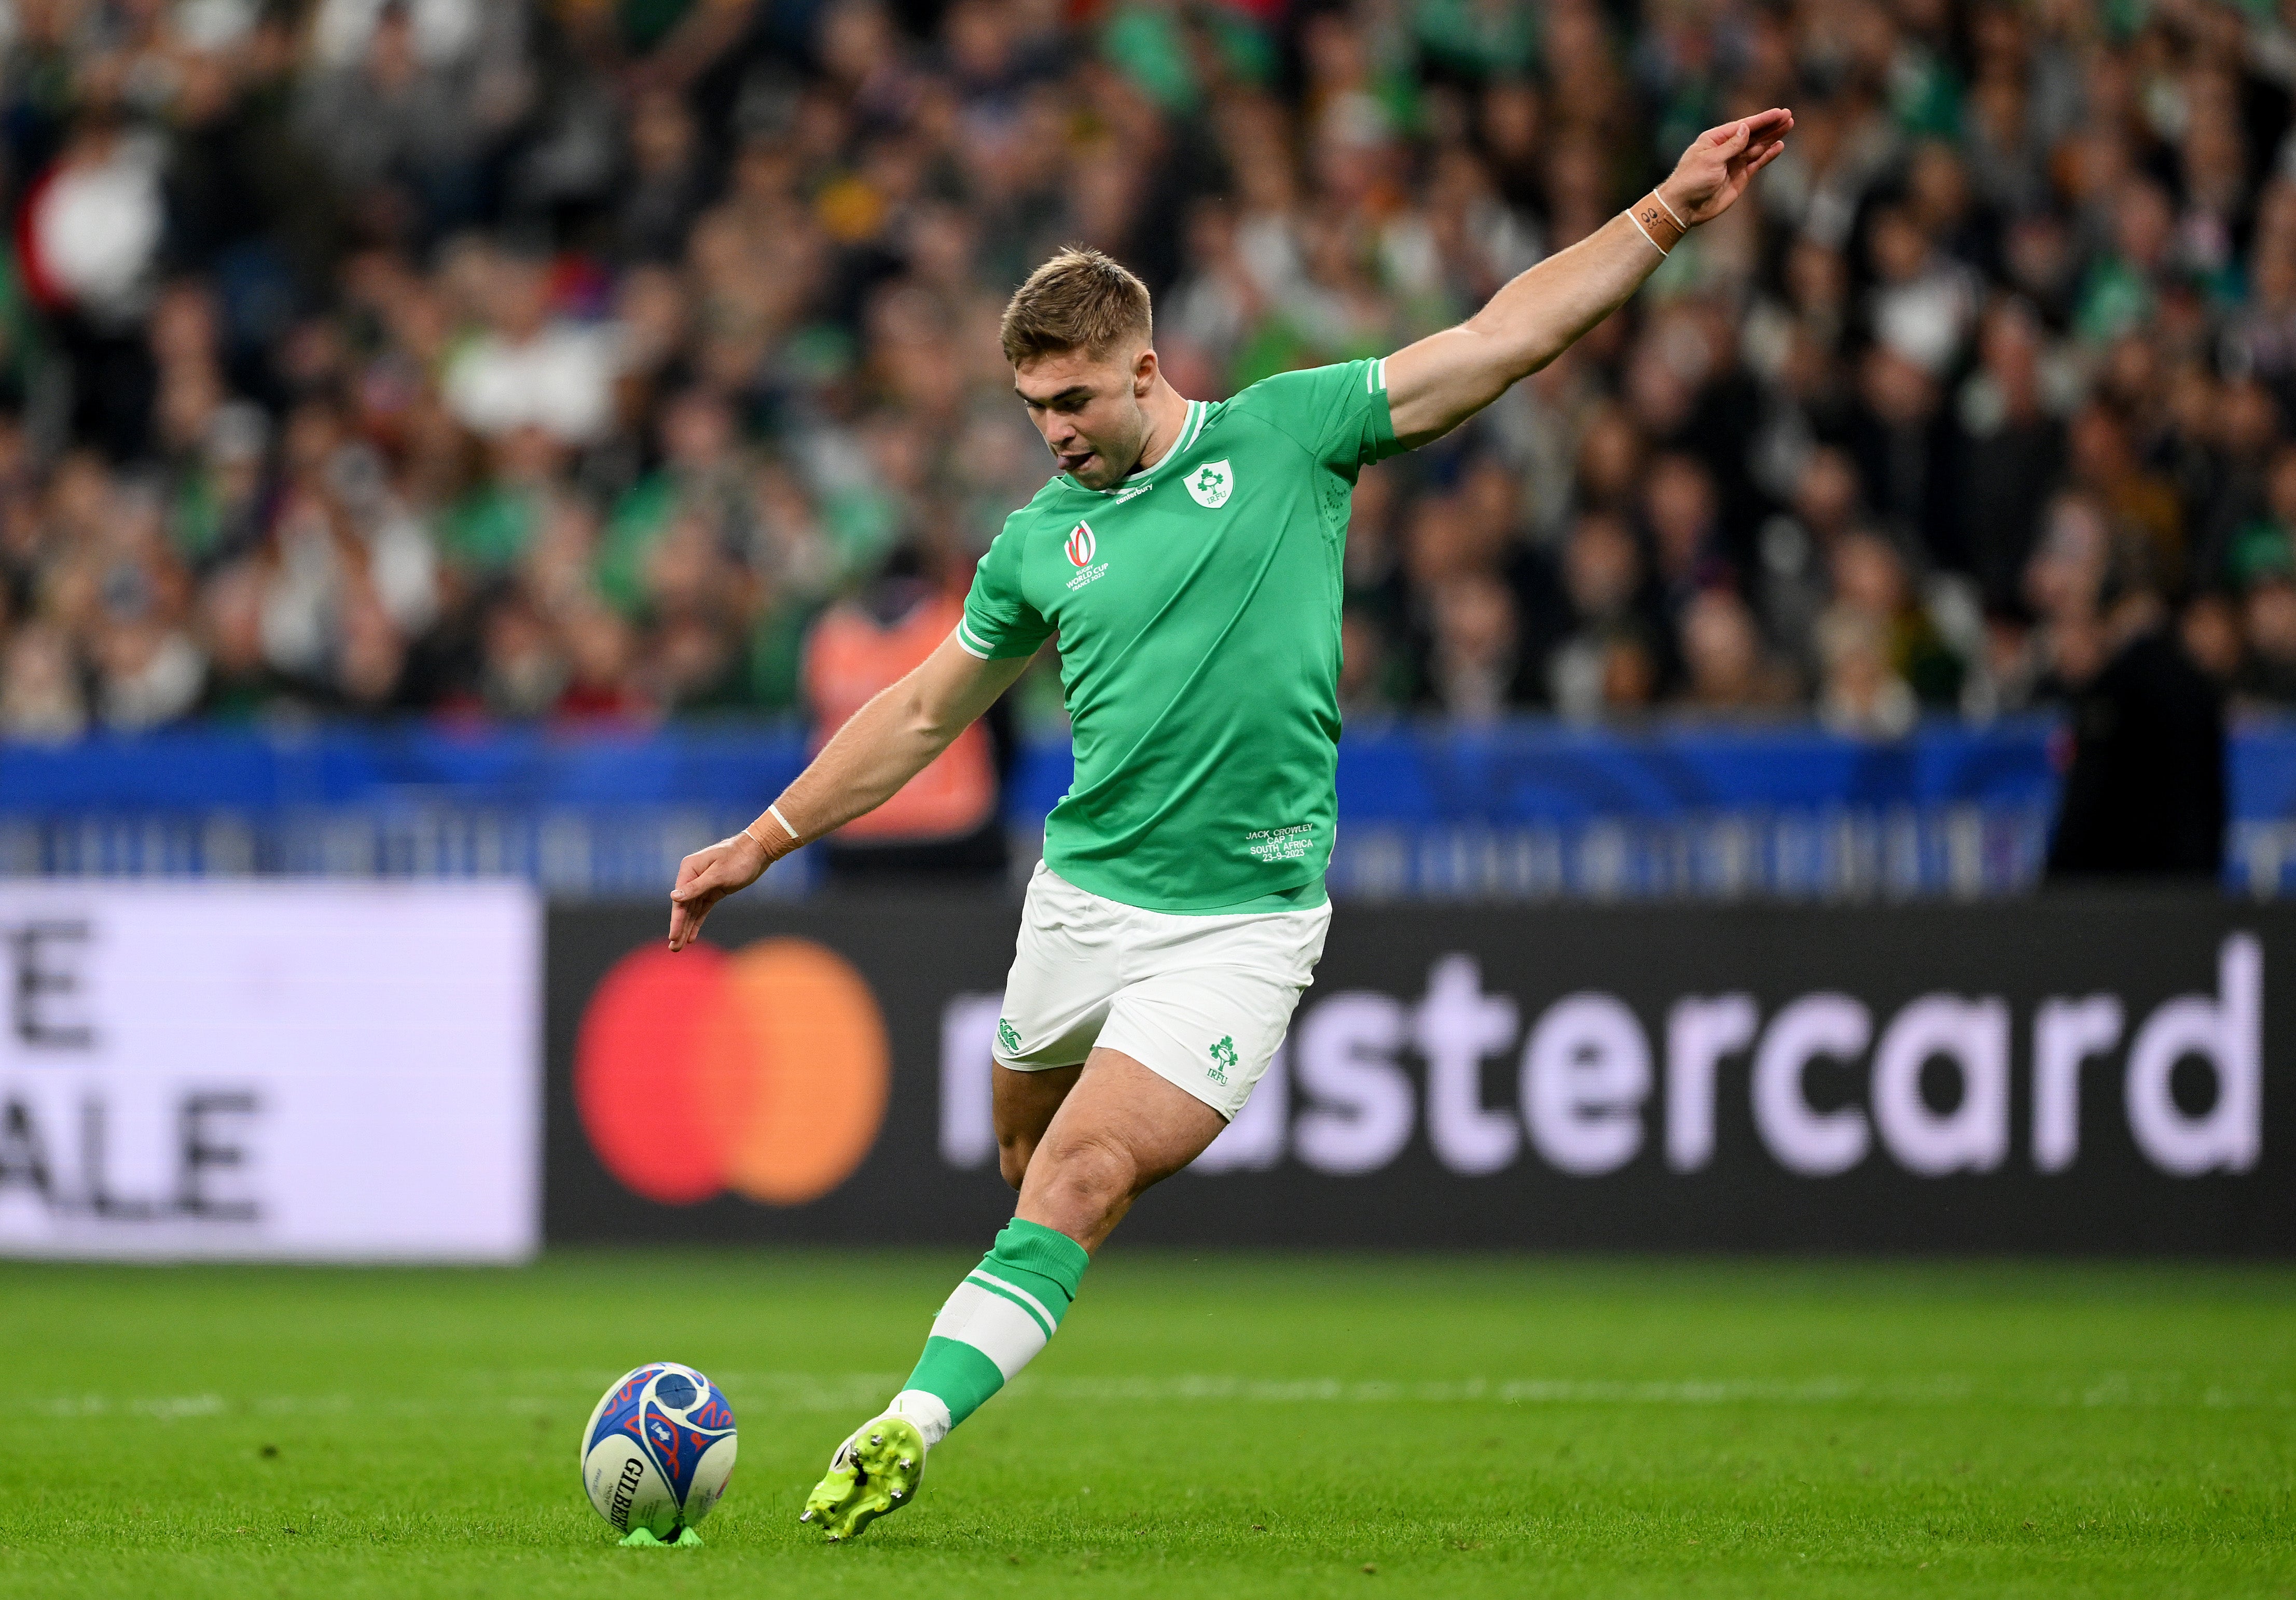 Jack Crowley takes over at fly half for Ireland after Johnny Sexton’s retirement